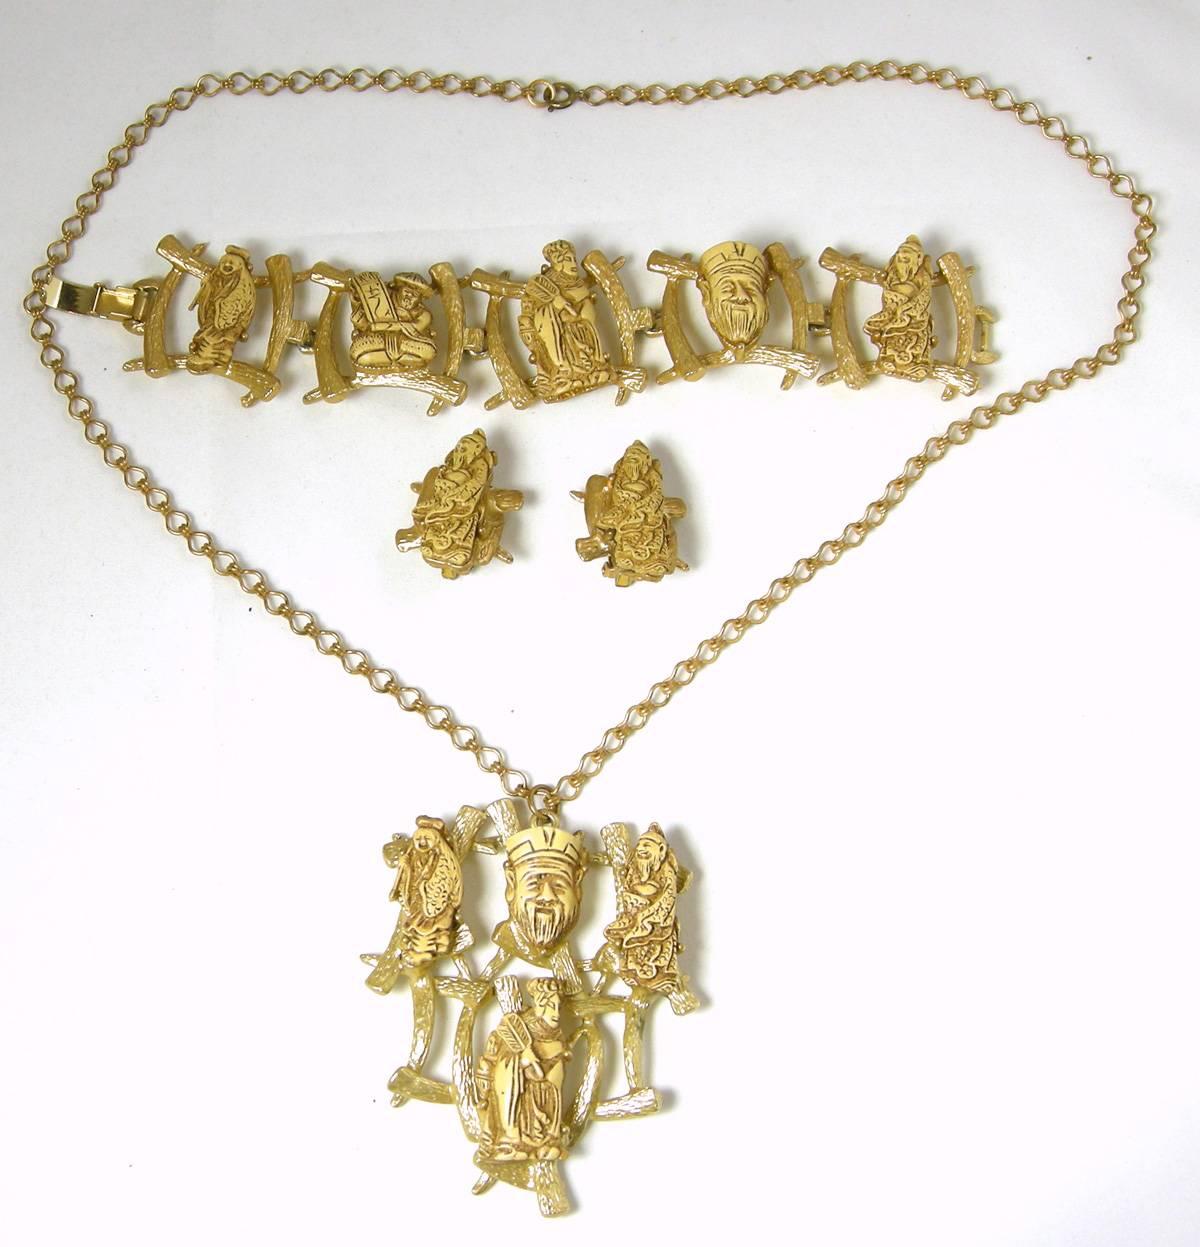 This is a fantastic 3 piece set consists of the necklace, bracelet and earrings.  Each piece is intricately carved and represents Buddha’s God of Fortune and Good Luck.  The necklace is 23” with a spring back clasp.  The pendant is 3” long x 2-1/4”